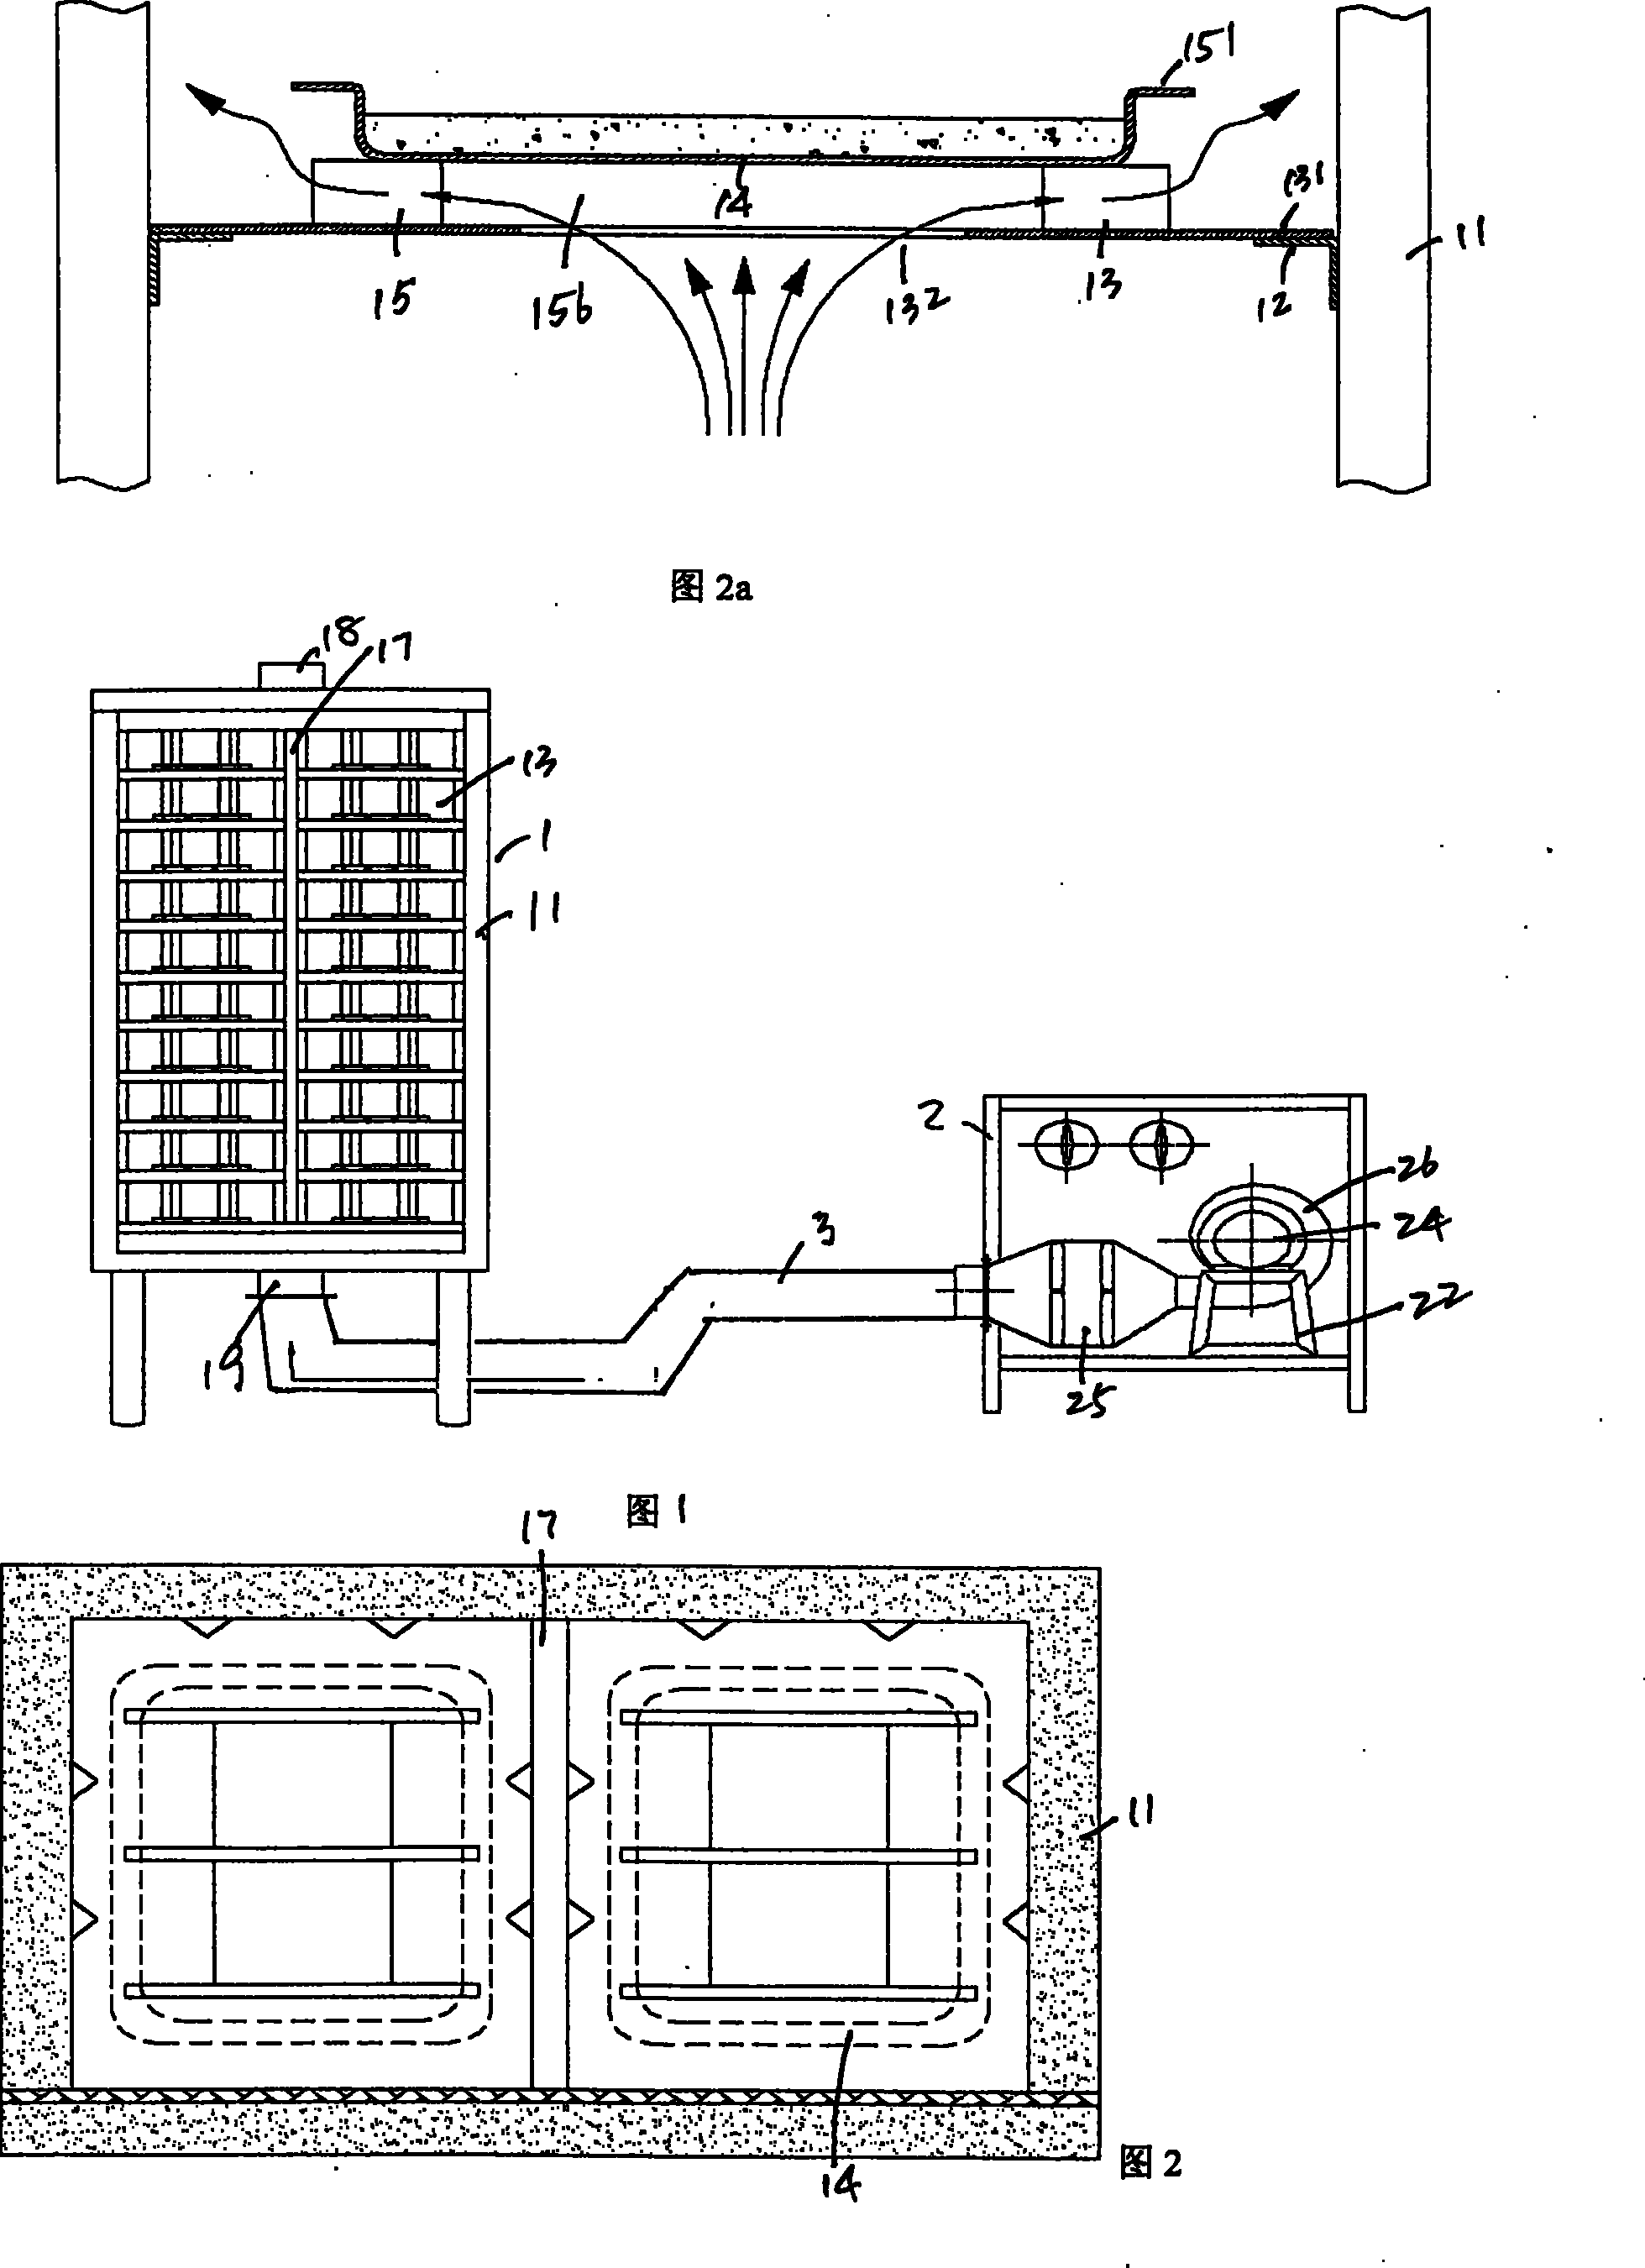 Rock sample drying apparatus and its drying box structure